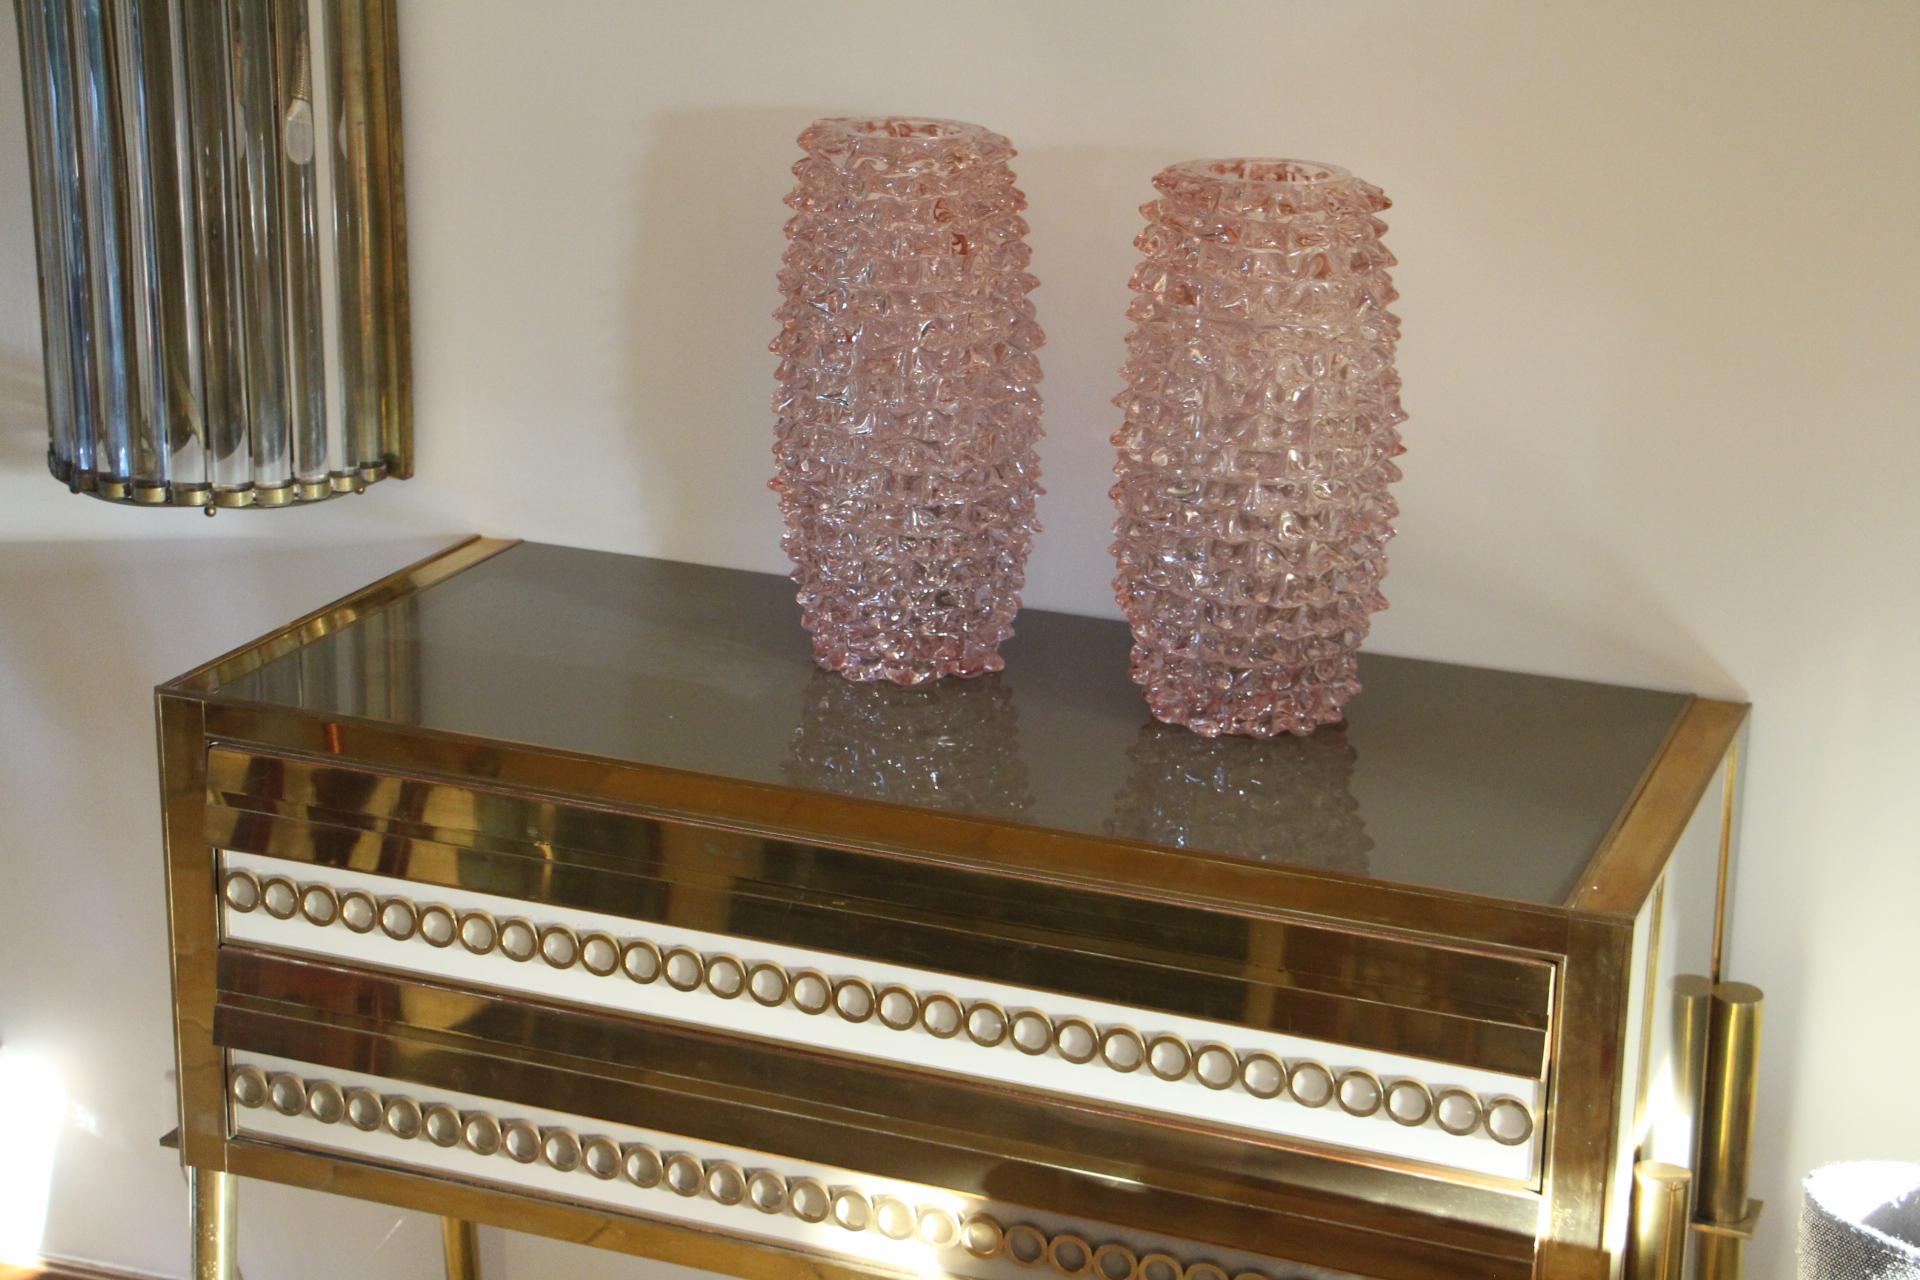 Pair of Tall Pink Vases in Murano Glass with Spikes Decor, Barovier Style 5